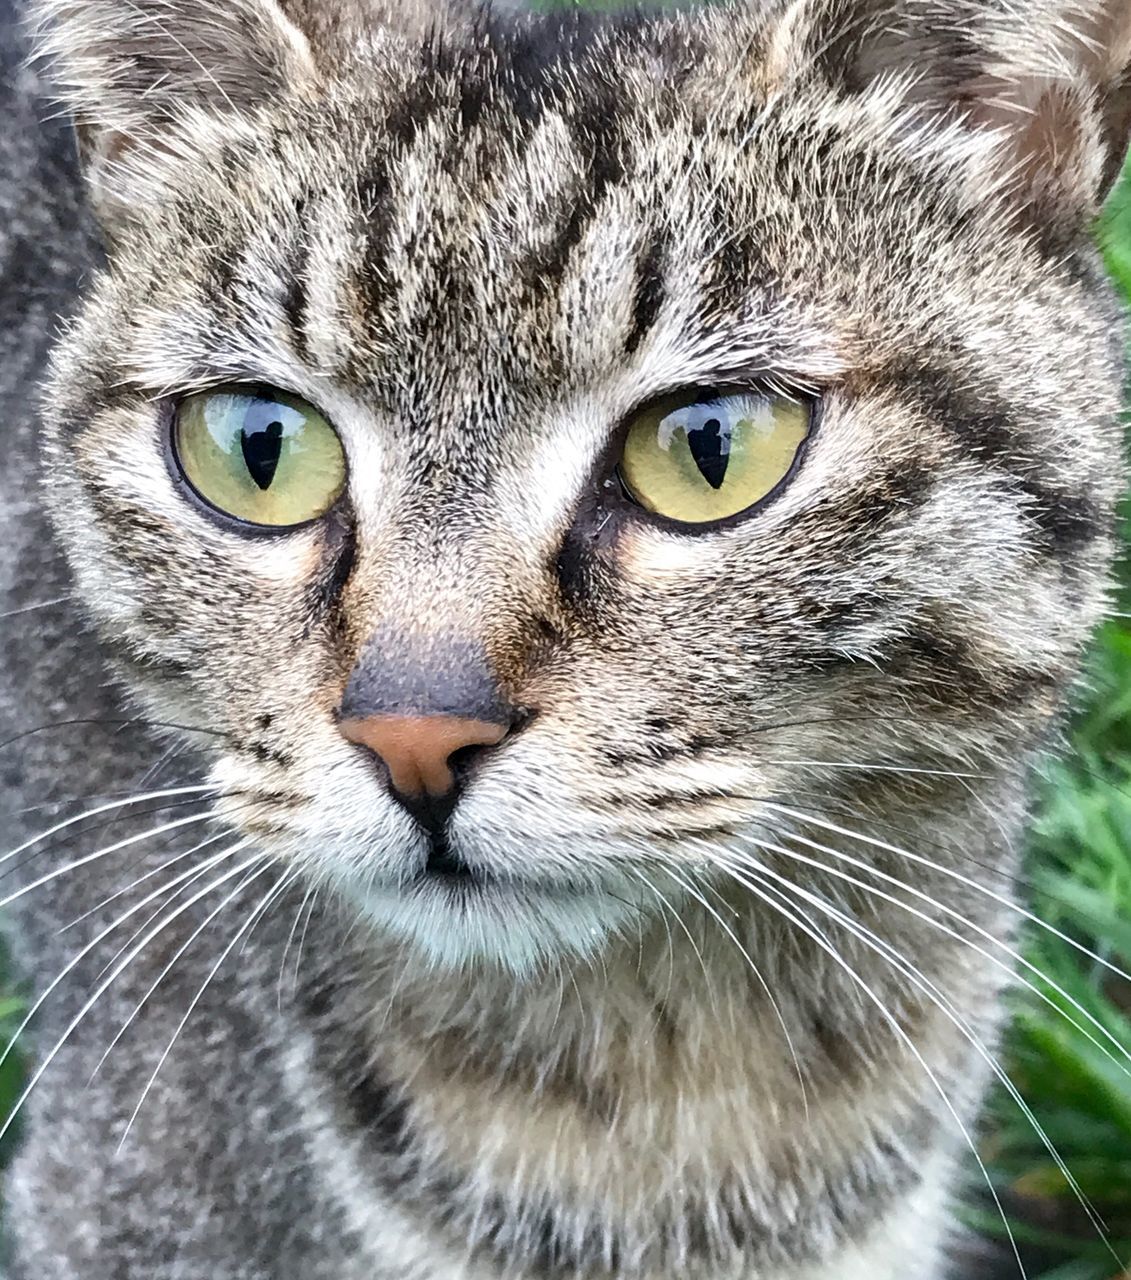 domestic cat, one animal, portrait, feline, pets, looking at camera, close-up, whisker, animal themes, domestic animals, mammal, no people, yellow eyes, day, outdoors